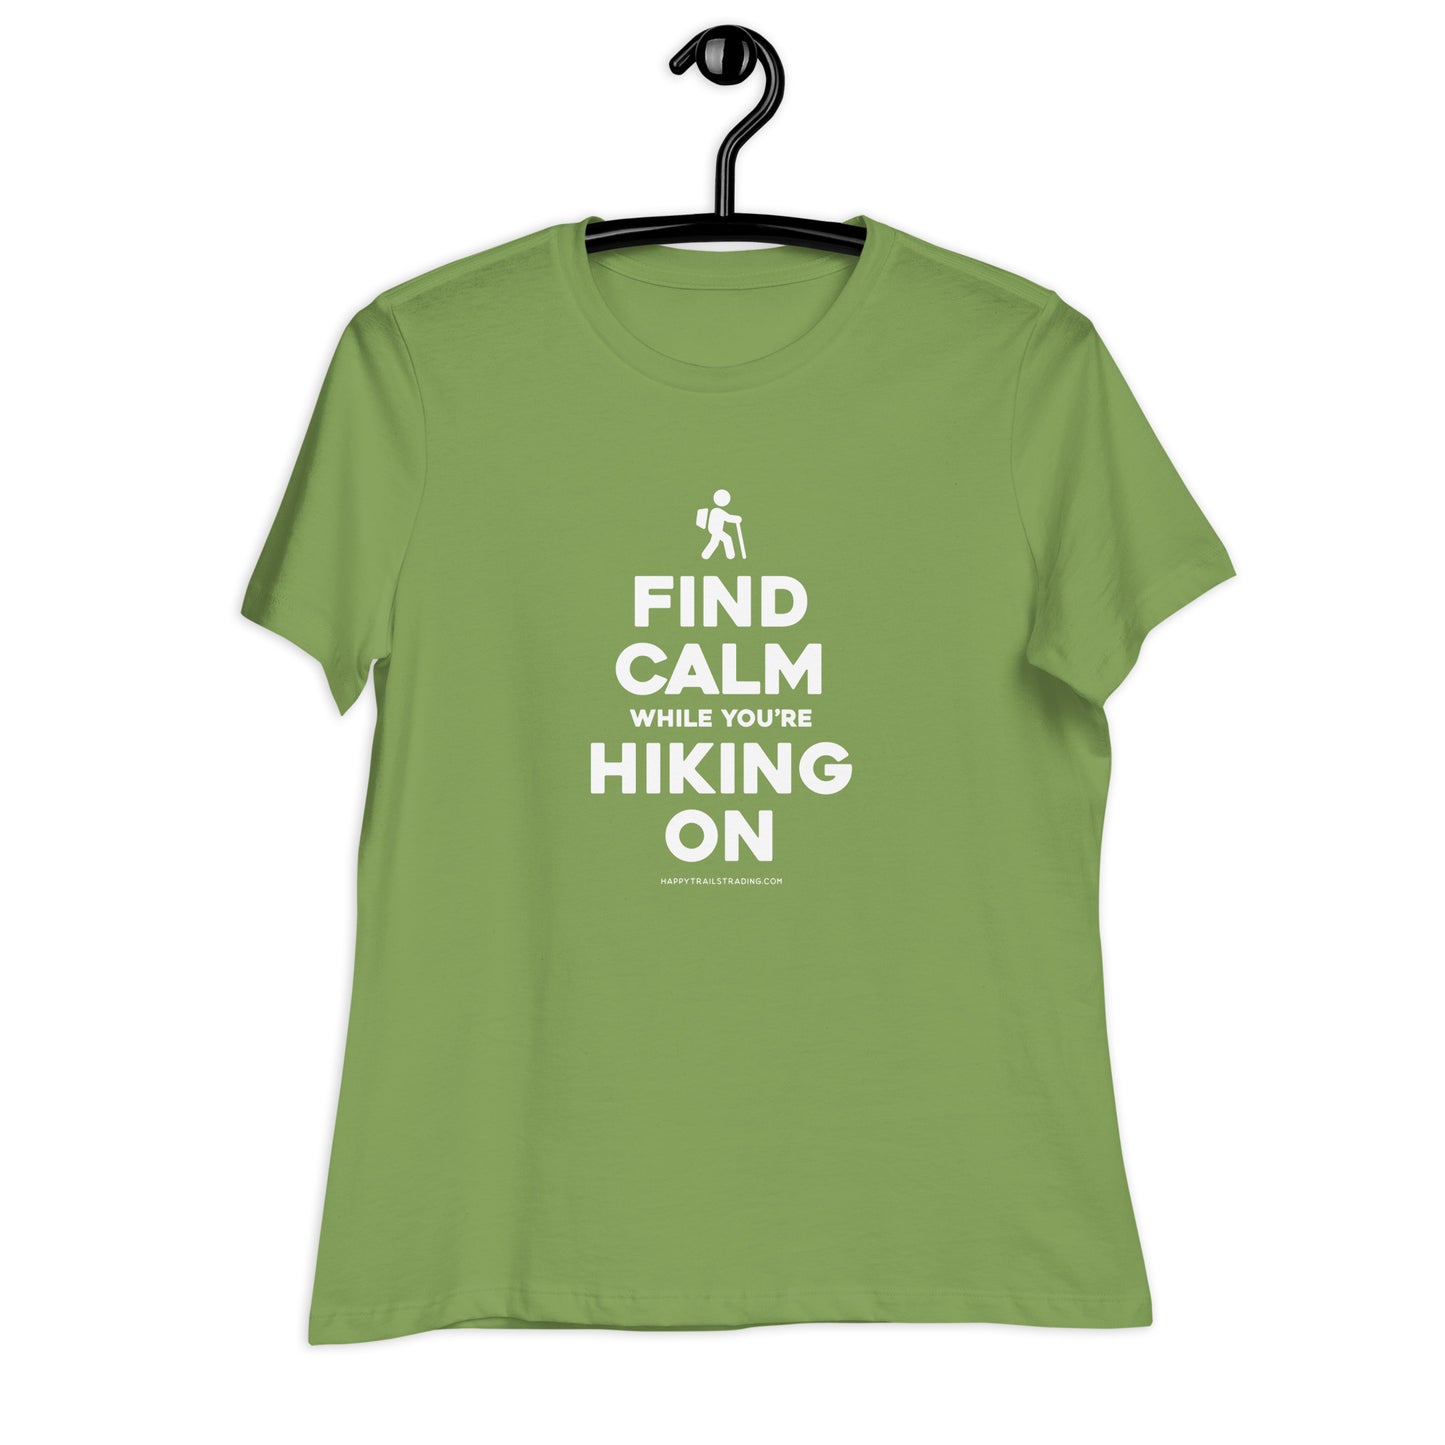 Find Calm While You're Hiking On - Women's Relaxed T-Shirt